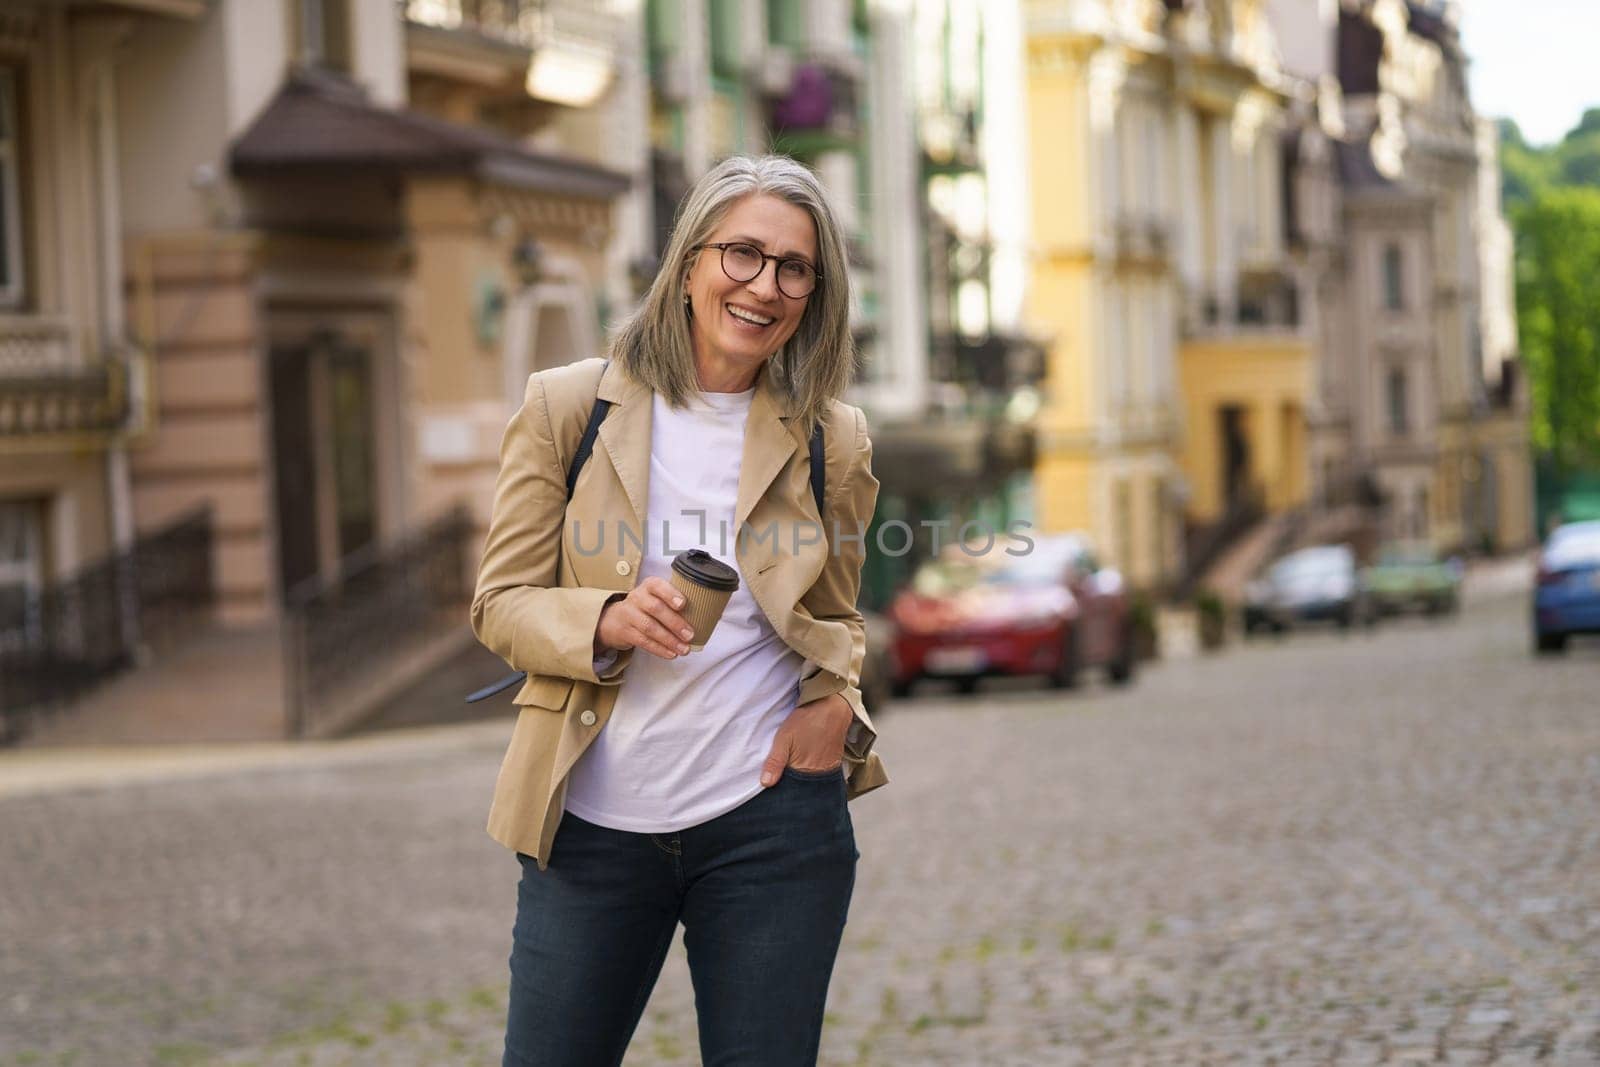 Mature woman with cheerful smile holding phone while exploring old European city. Photo captures concept of elderly happiness and technology use for communication and travel purposes. High quality photo